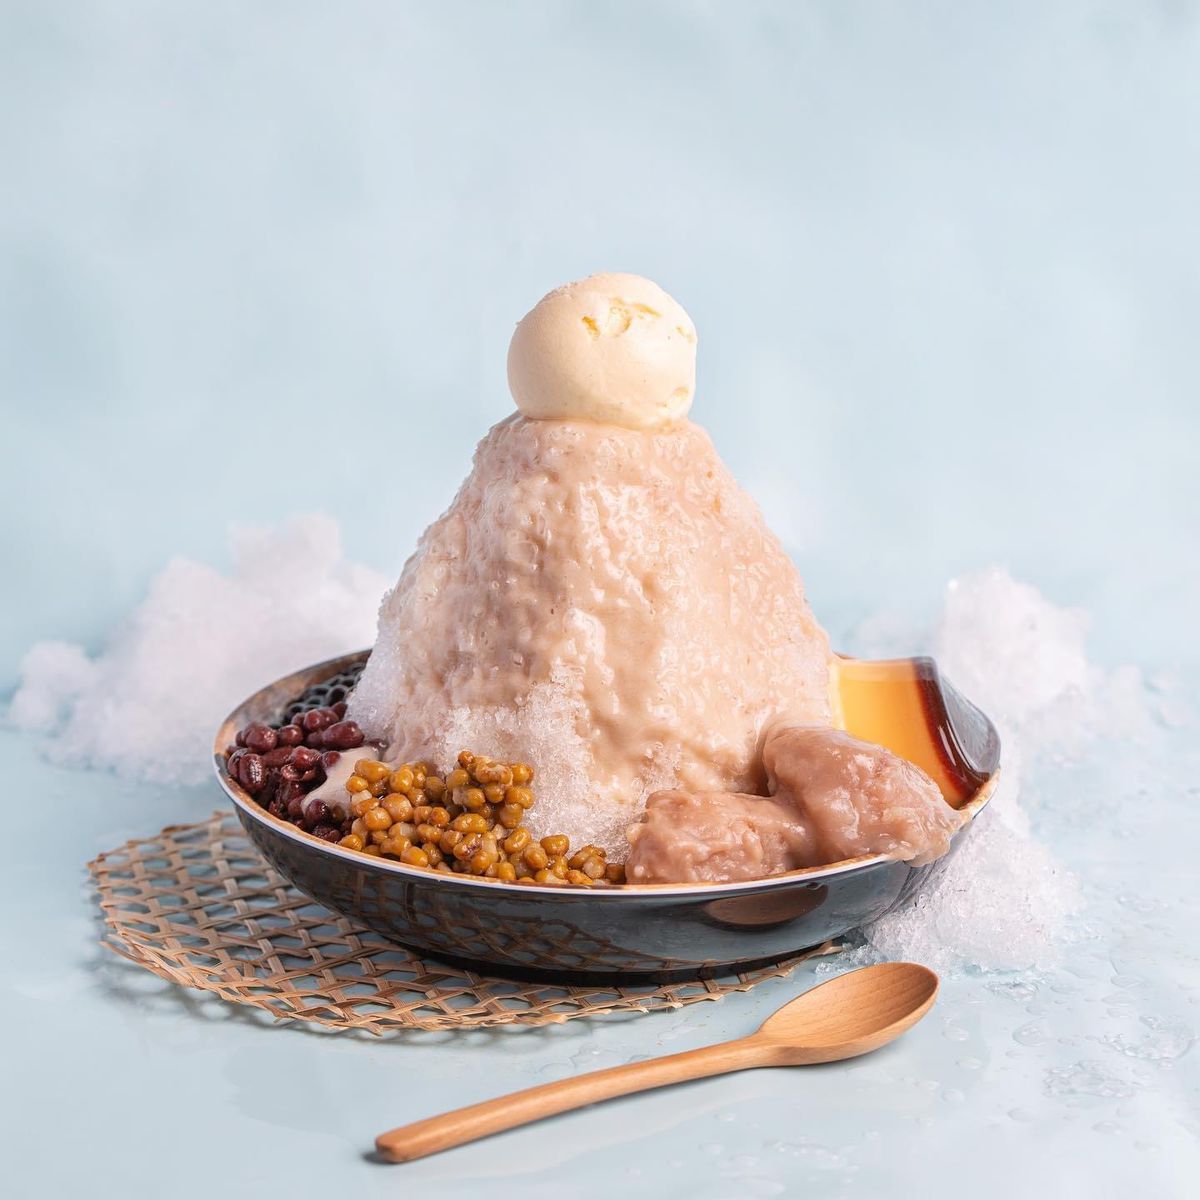 A tall serving of shaved ice is served with sweetened beans, brown sugar boba, and topped with a scoop of pudding.